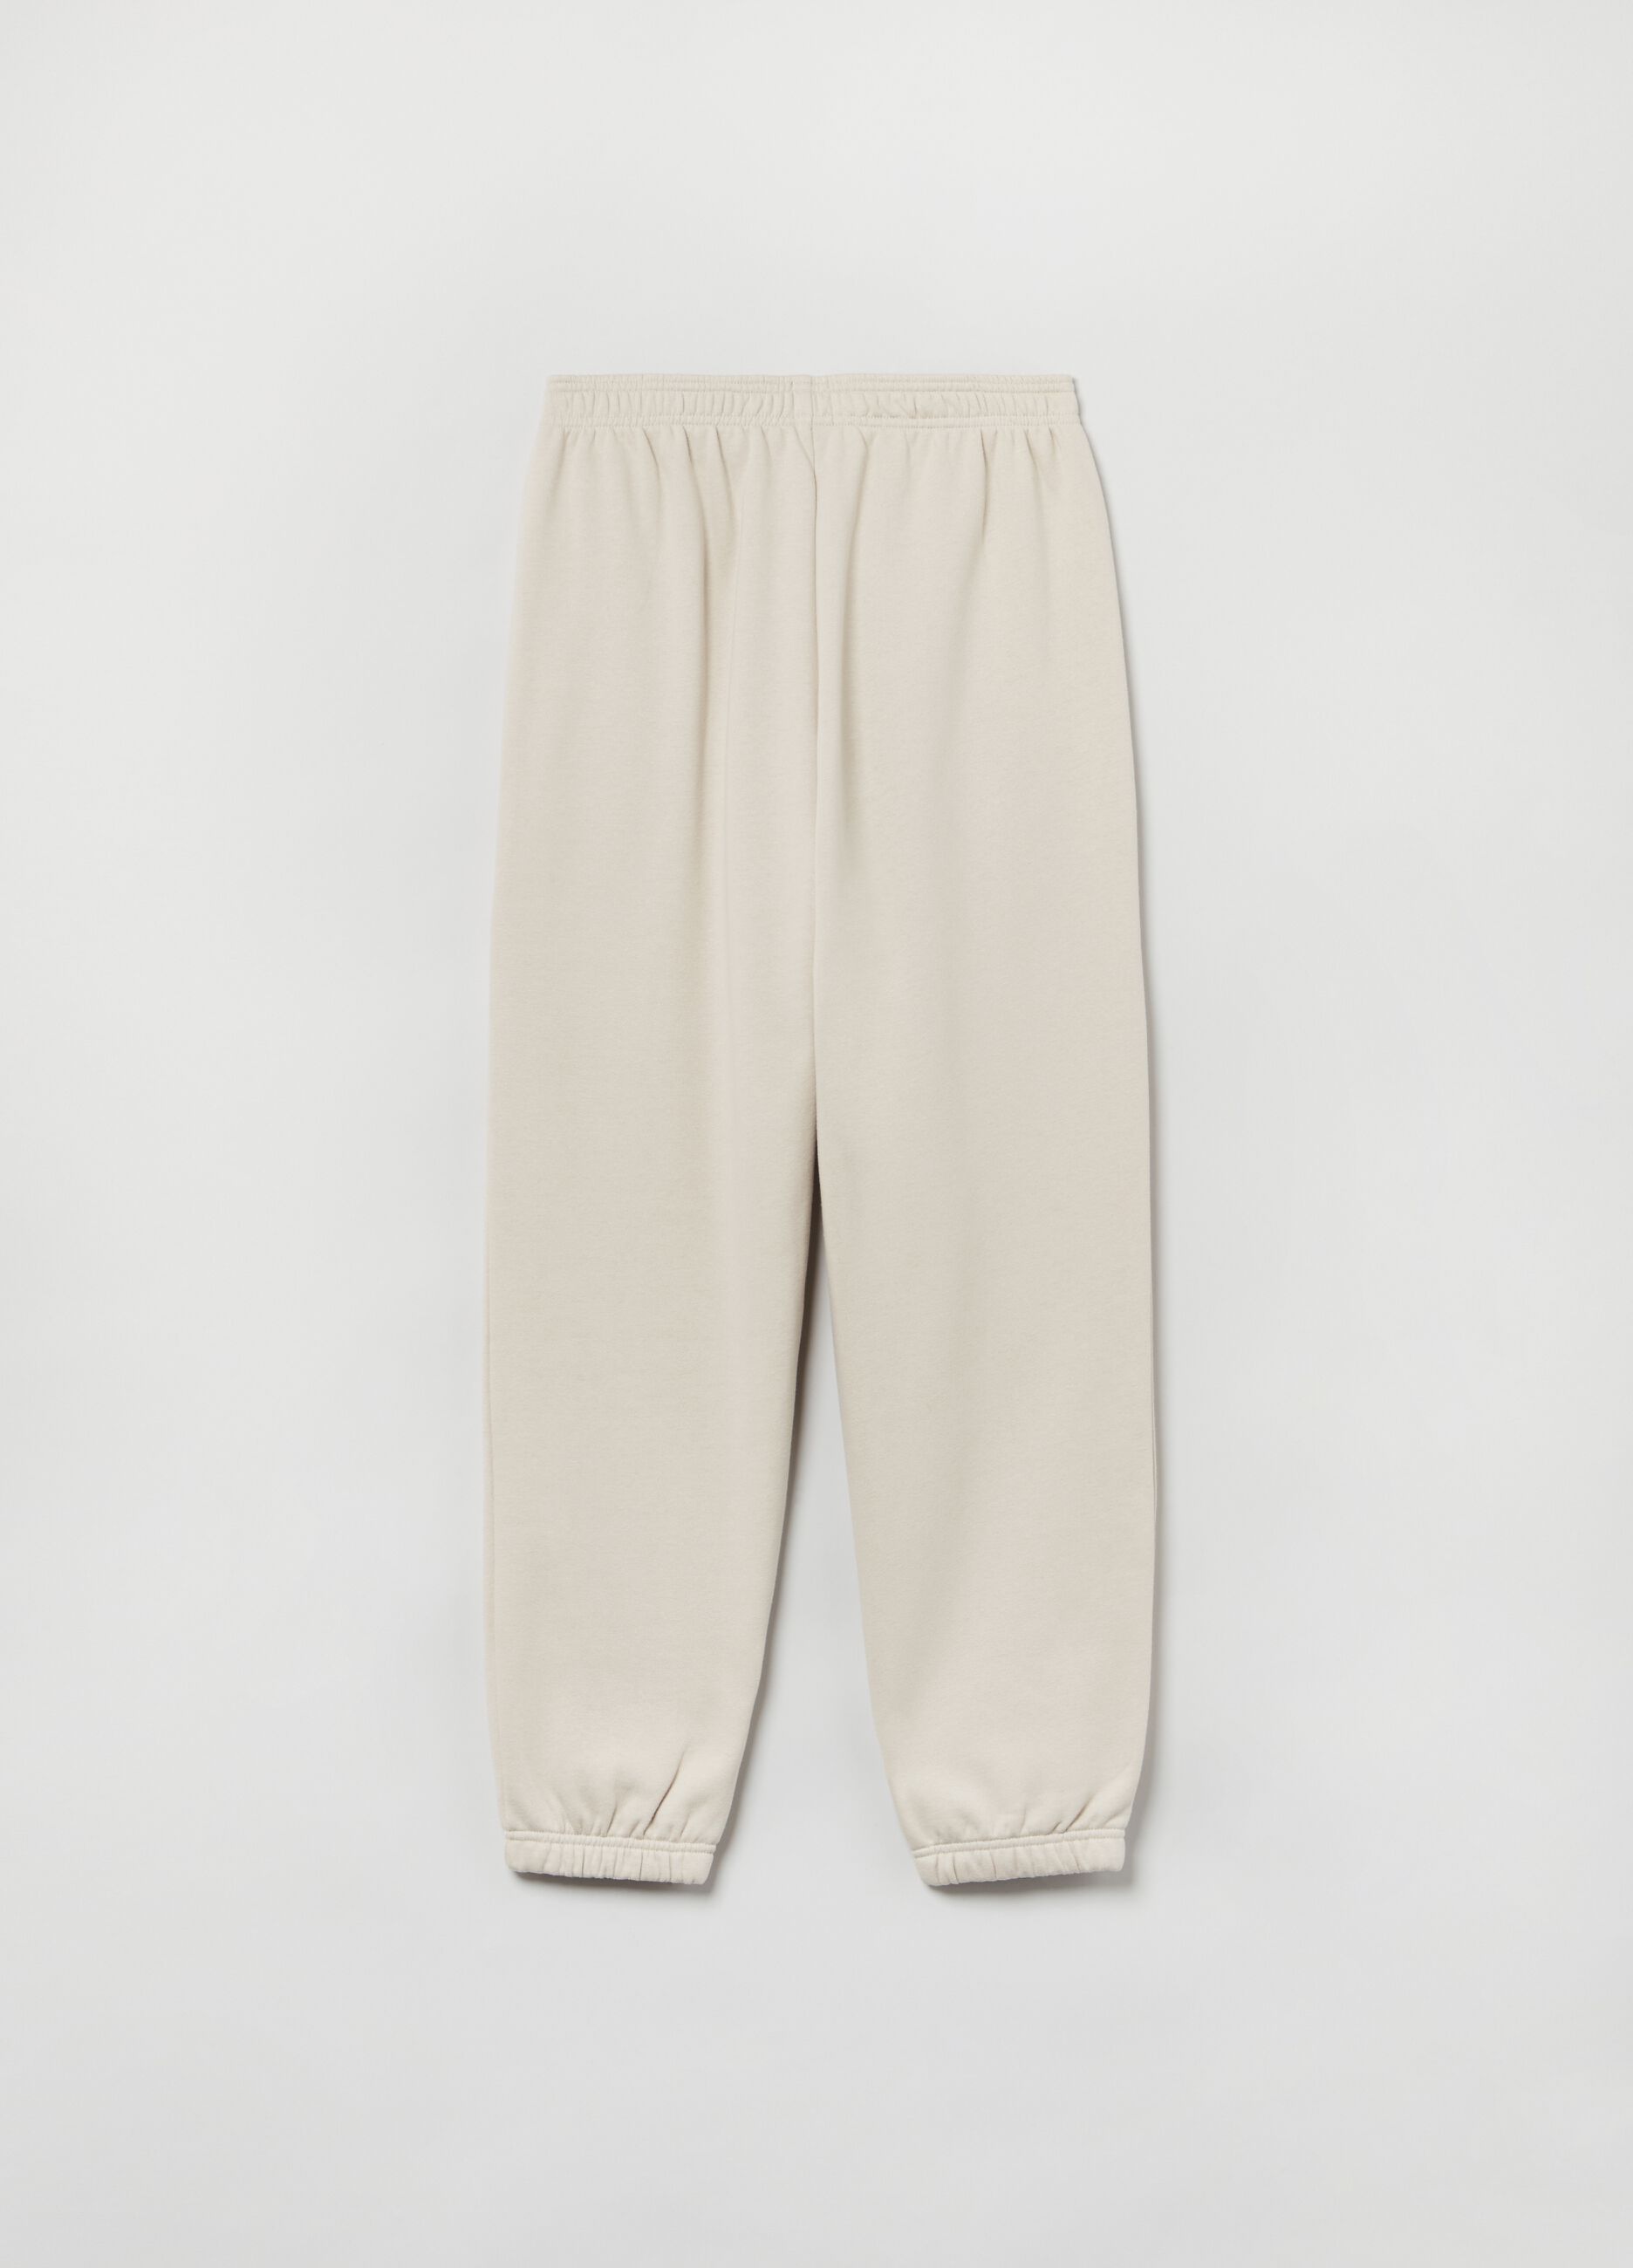 High-rise, easy-fit joggers in plush_2